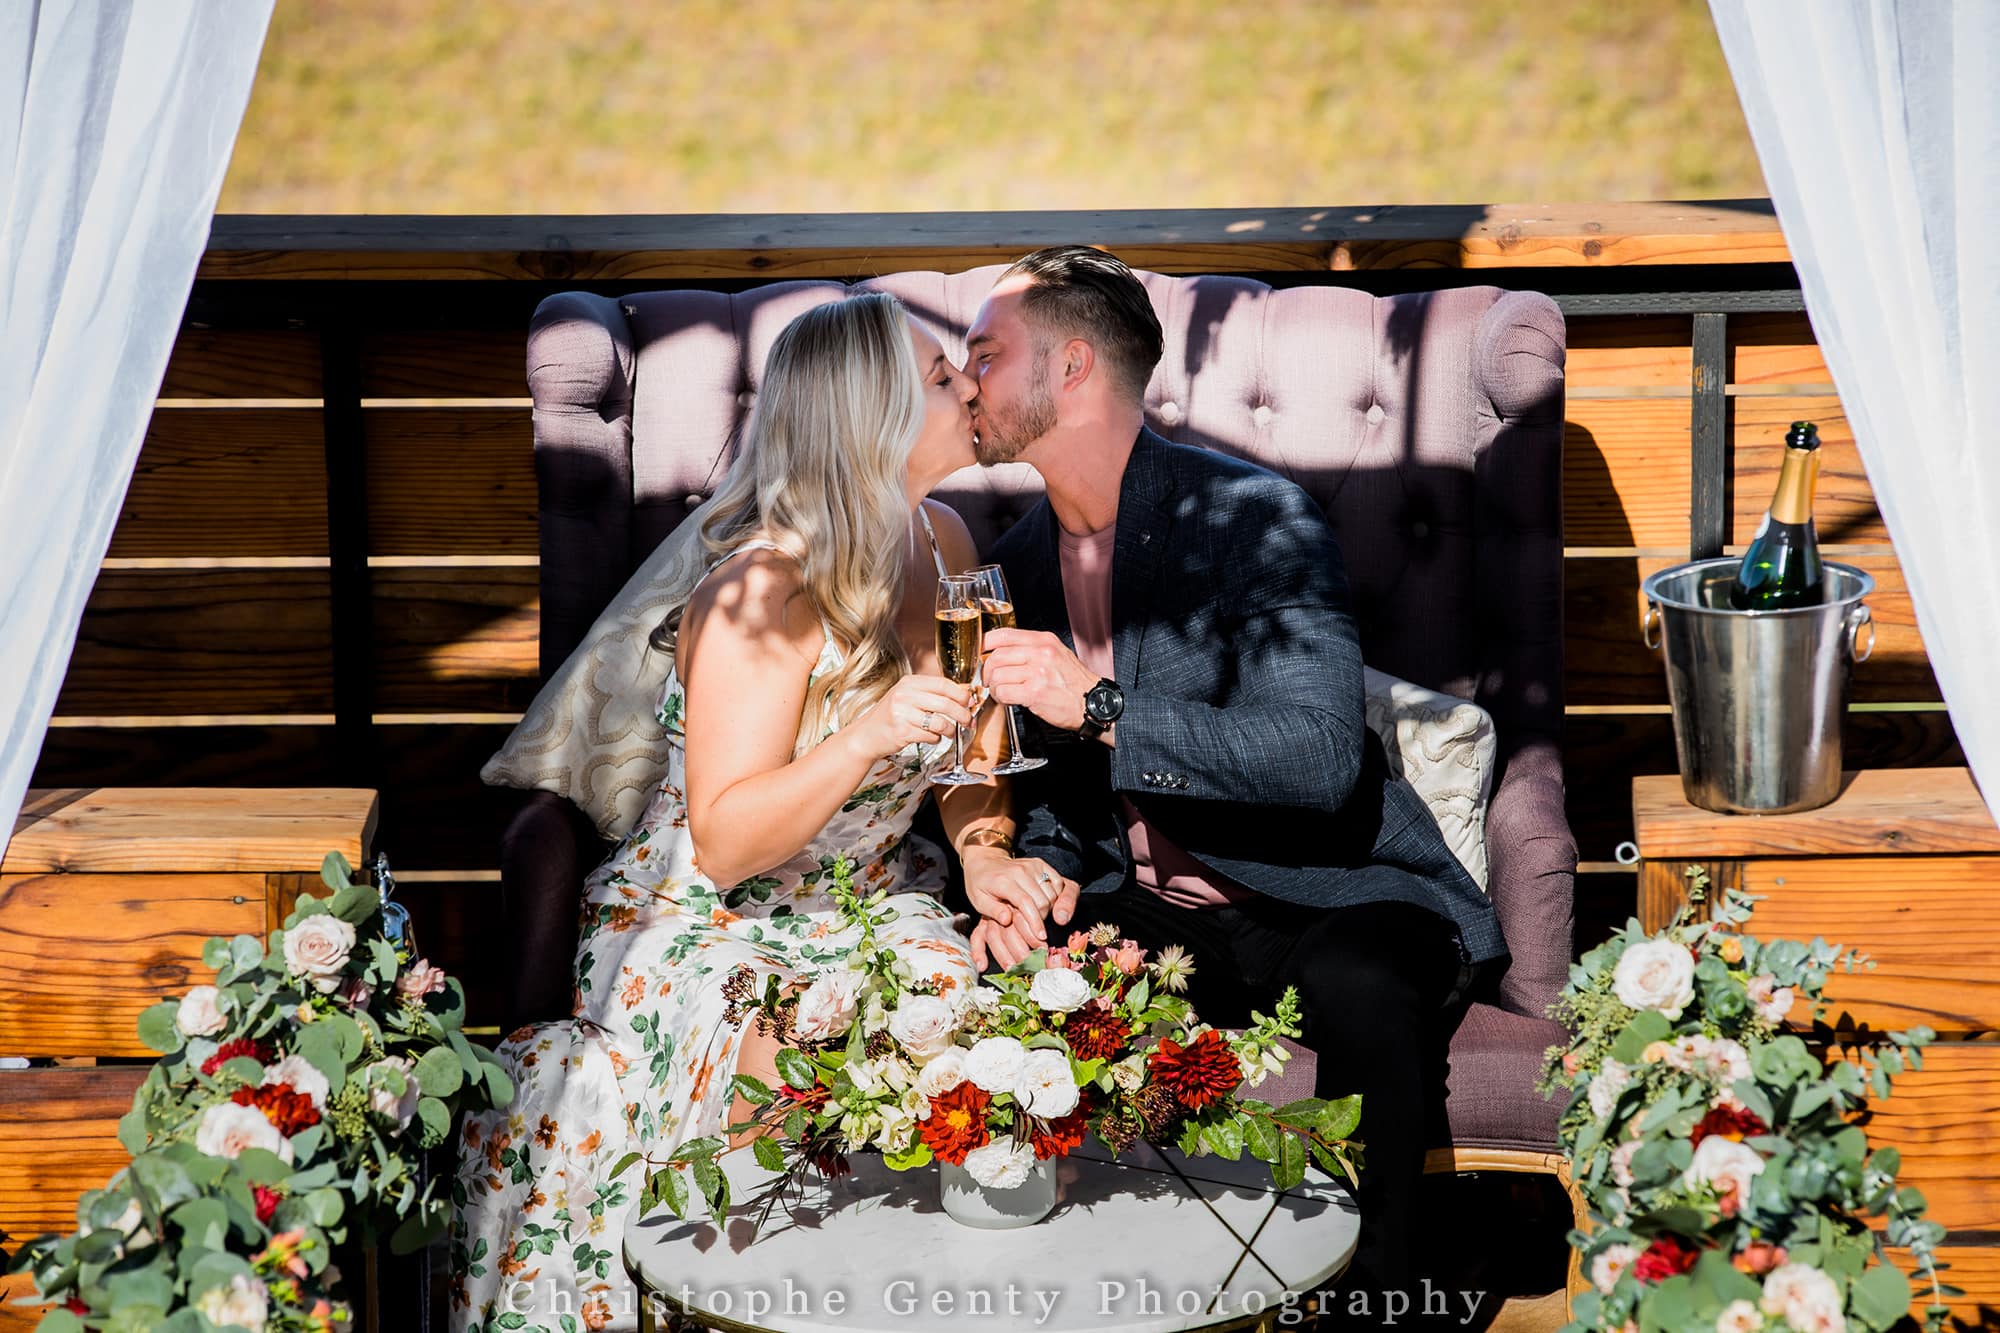 Best Proposal Wineries in The Sonoma Valley - Viansa Winery